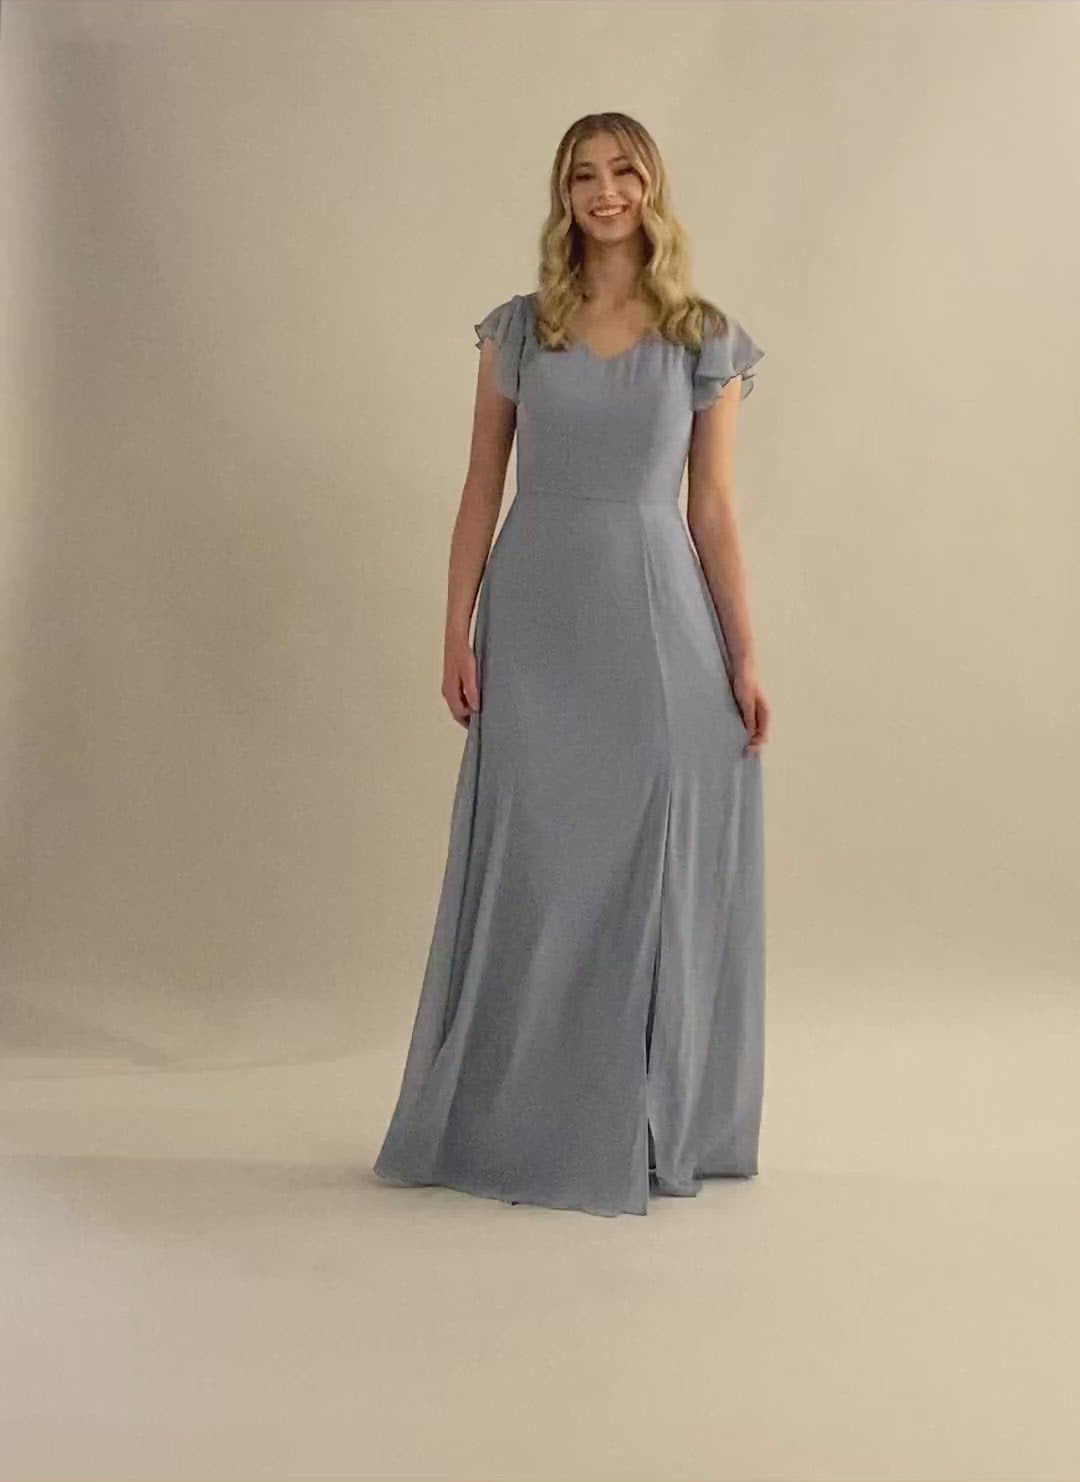 Video of the blue dress to floor length. Modest Dresses - Modest Prom Dress - Formalwear Modest Dresses - Bridesmaid Modest Dresses. 